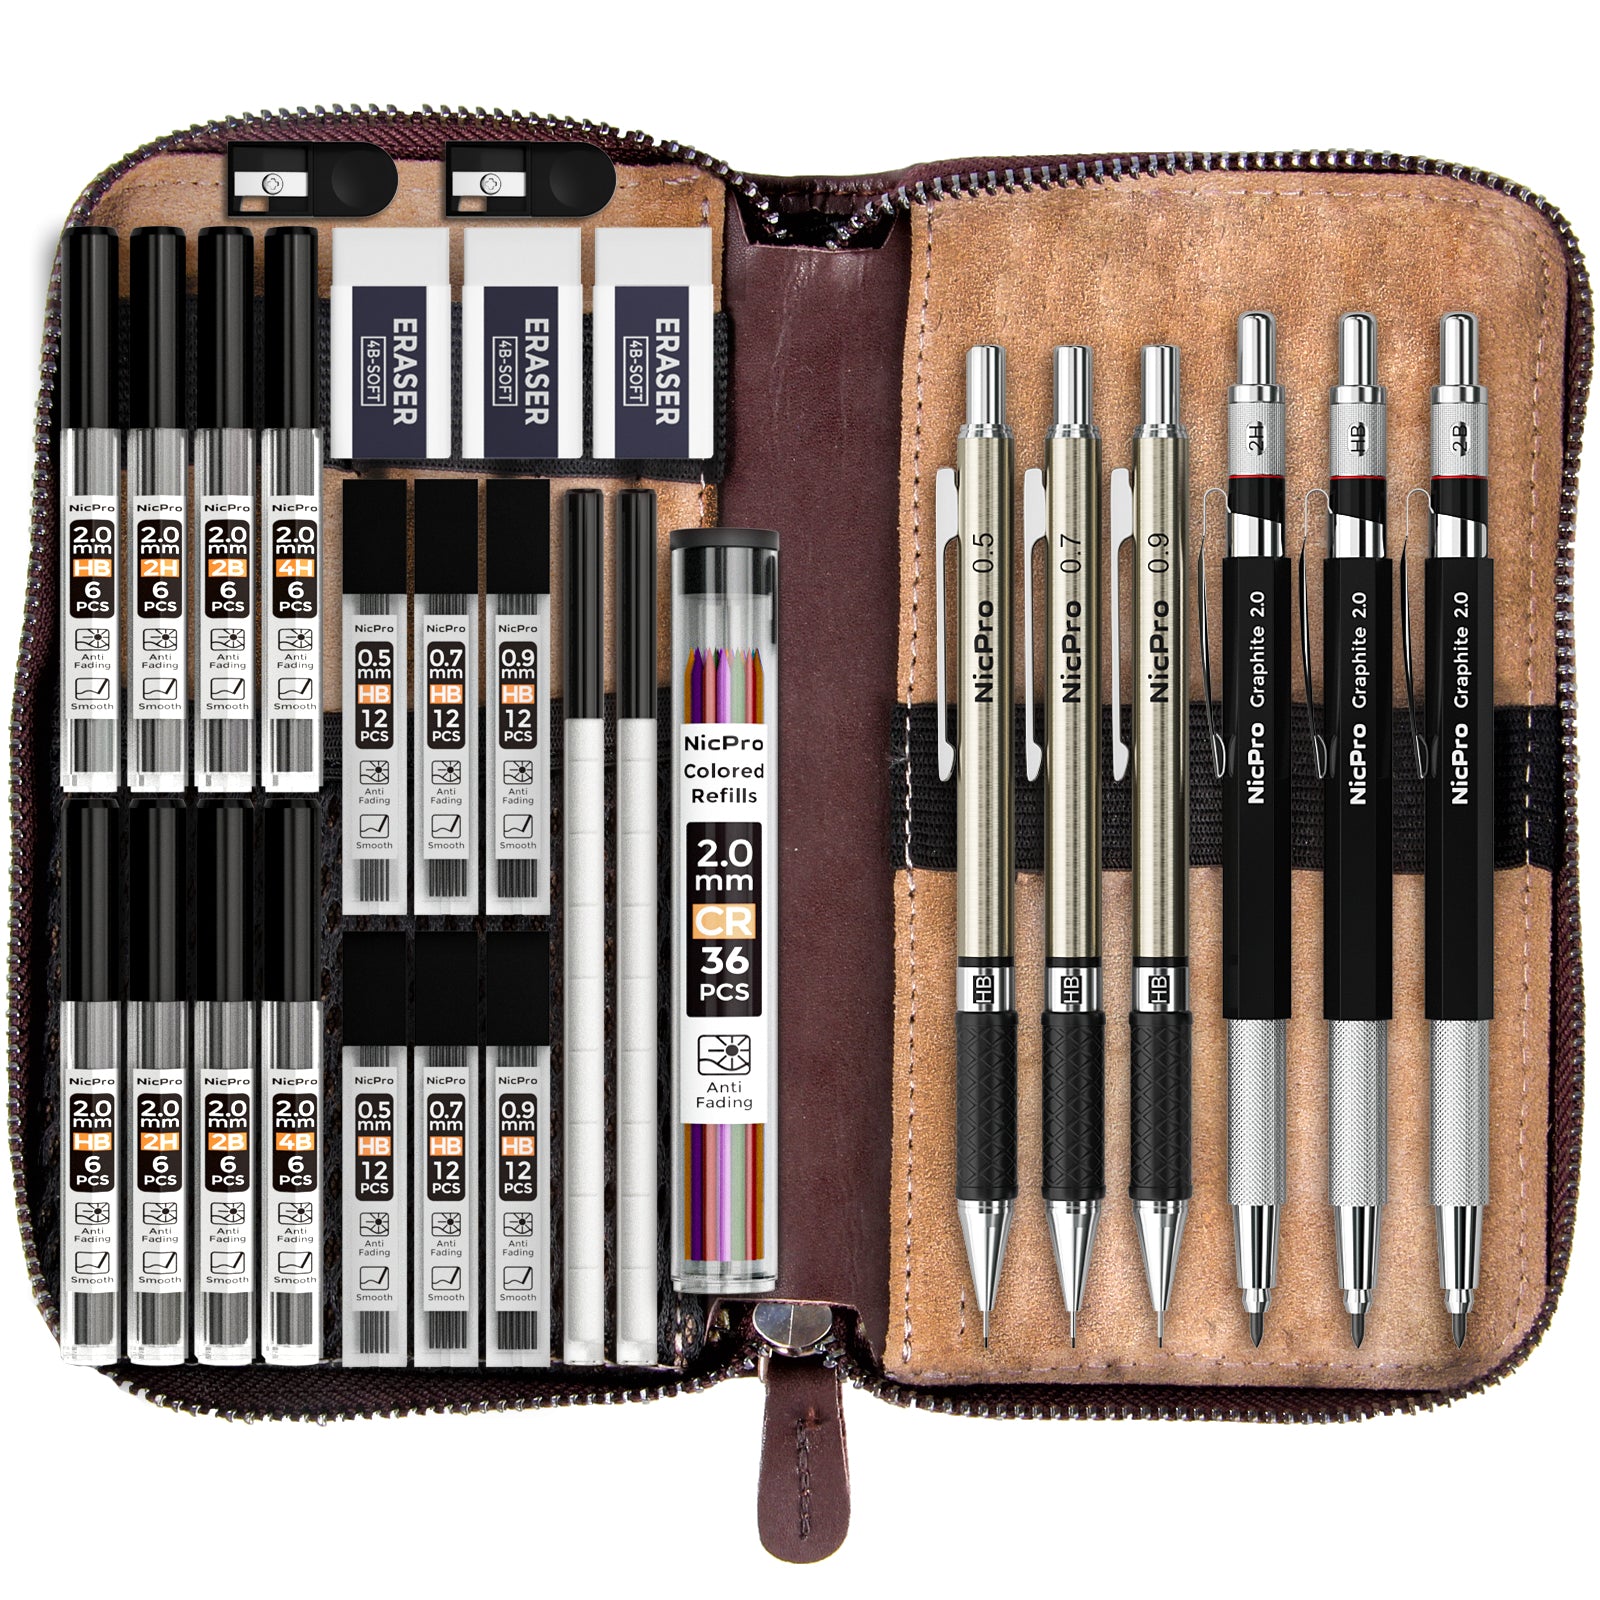  Nicpro 29PCS Metal Drafting Pencil Set with Leather Case -  0.5, 0.7, 0.9mm and 2mm Sizes, 15 Lead Refills : Office Products